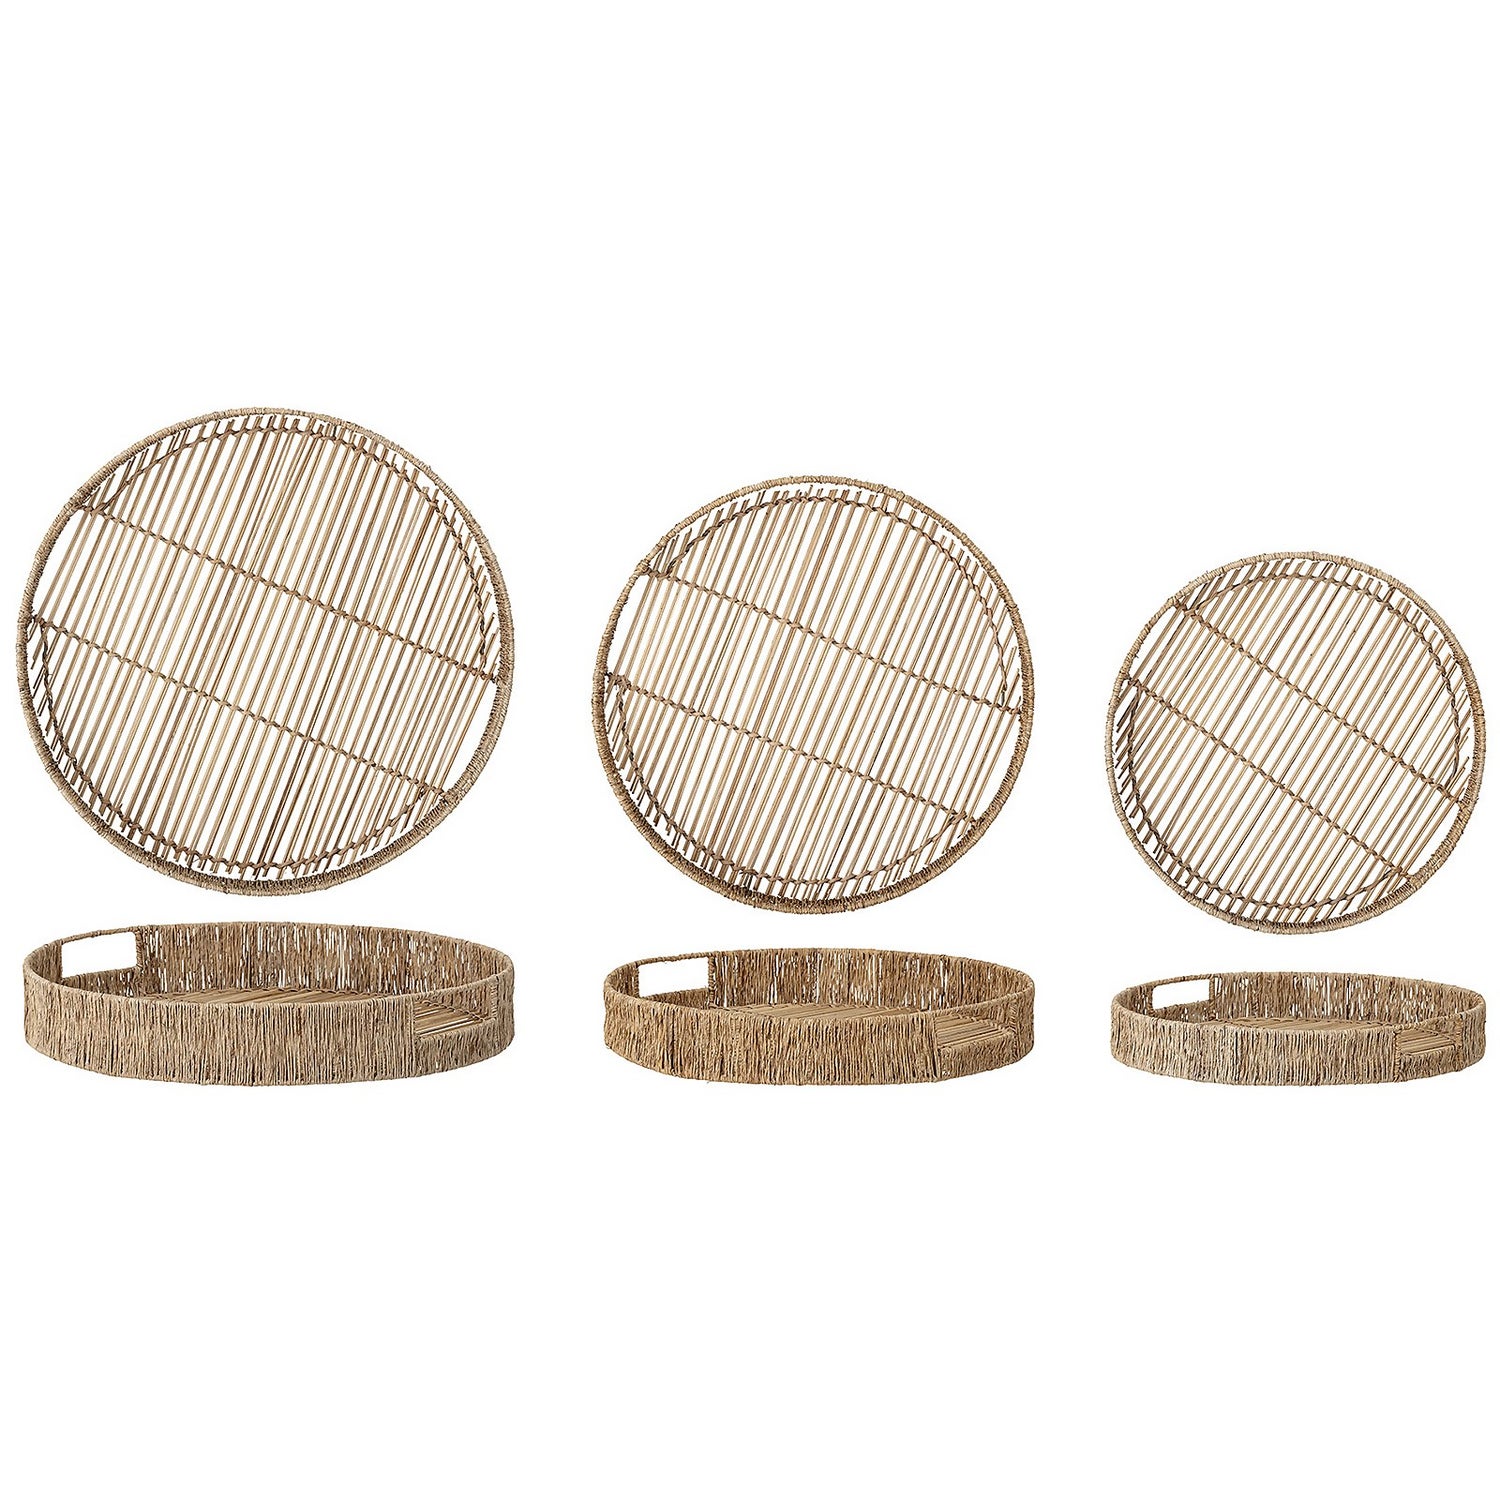 Bloomingville Bamboo Serving Tray - Set of 3